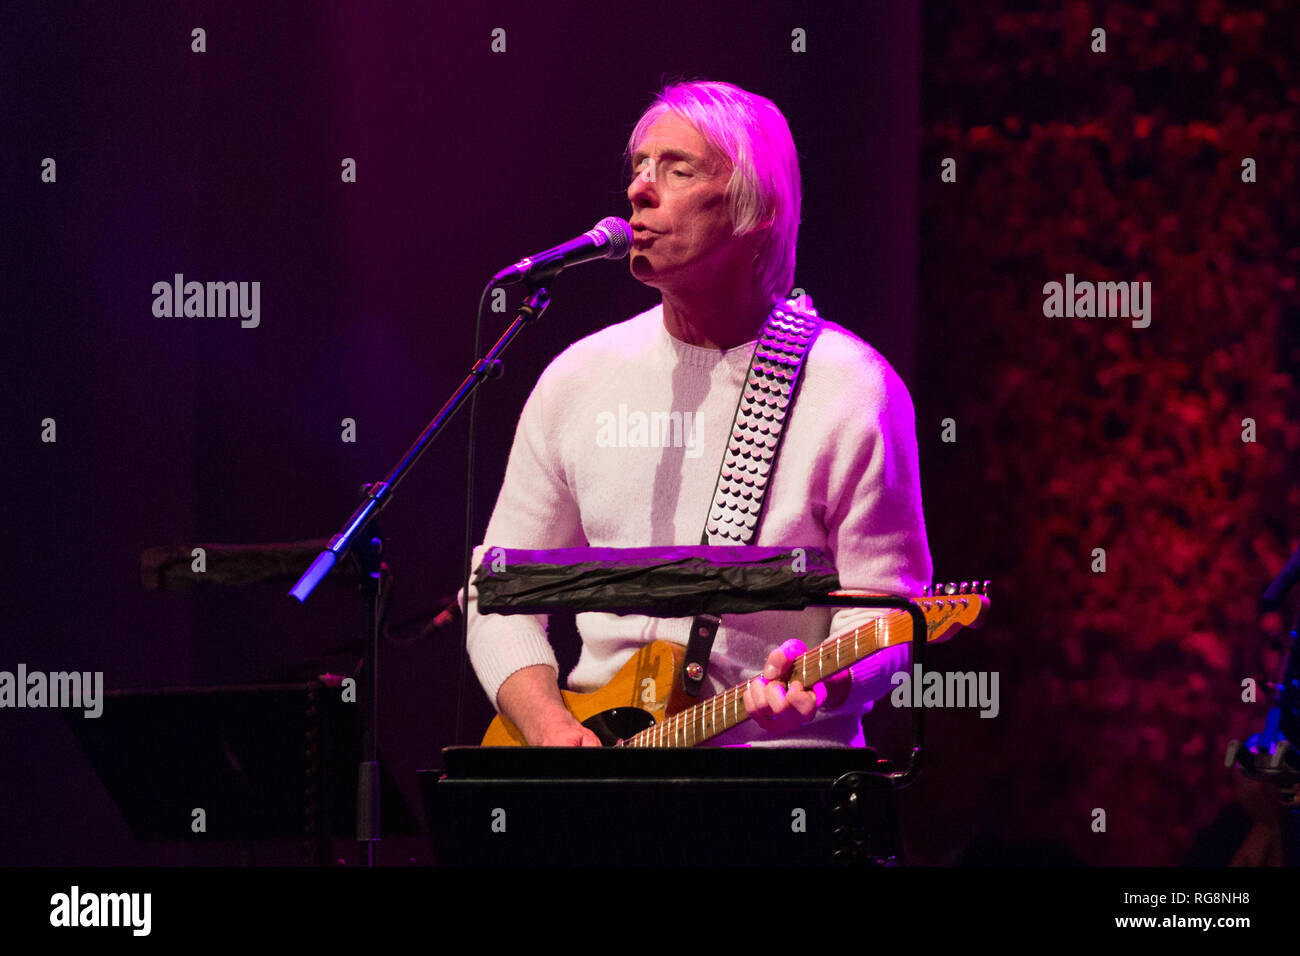 Glasgow, Scotland, UK. 27th Jan, 2019. Paul Weller, English musician, performed at Grace and Danger concert for John Martyn, Celtic Connections 2019, Glasgow, Scotlandd. Credit: Pauline Keightley/Alamy Live News Stock Photo